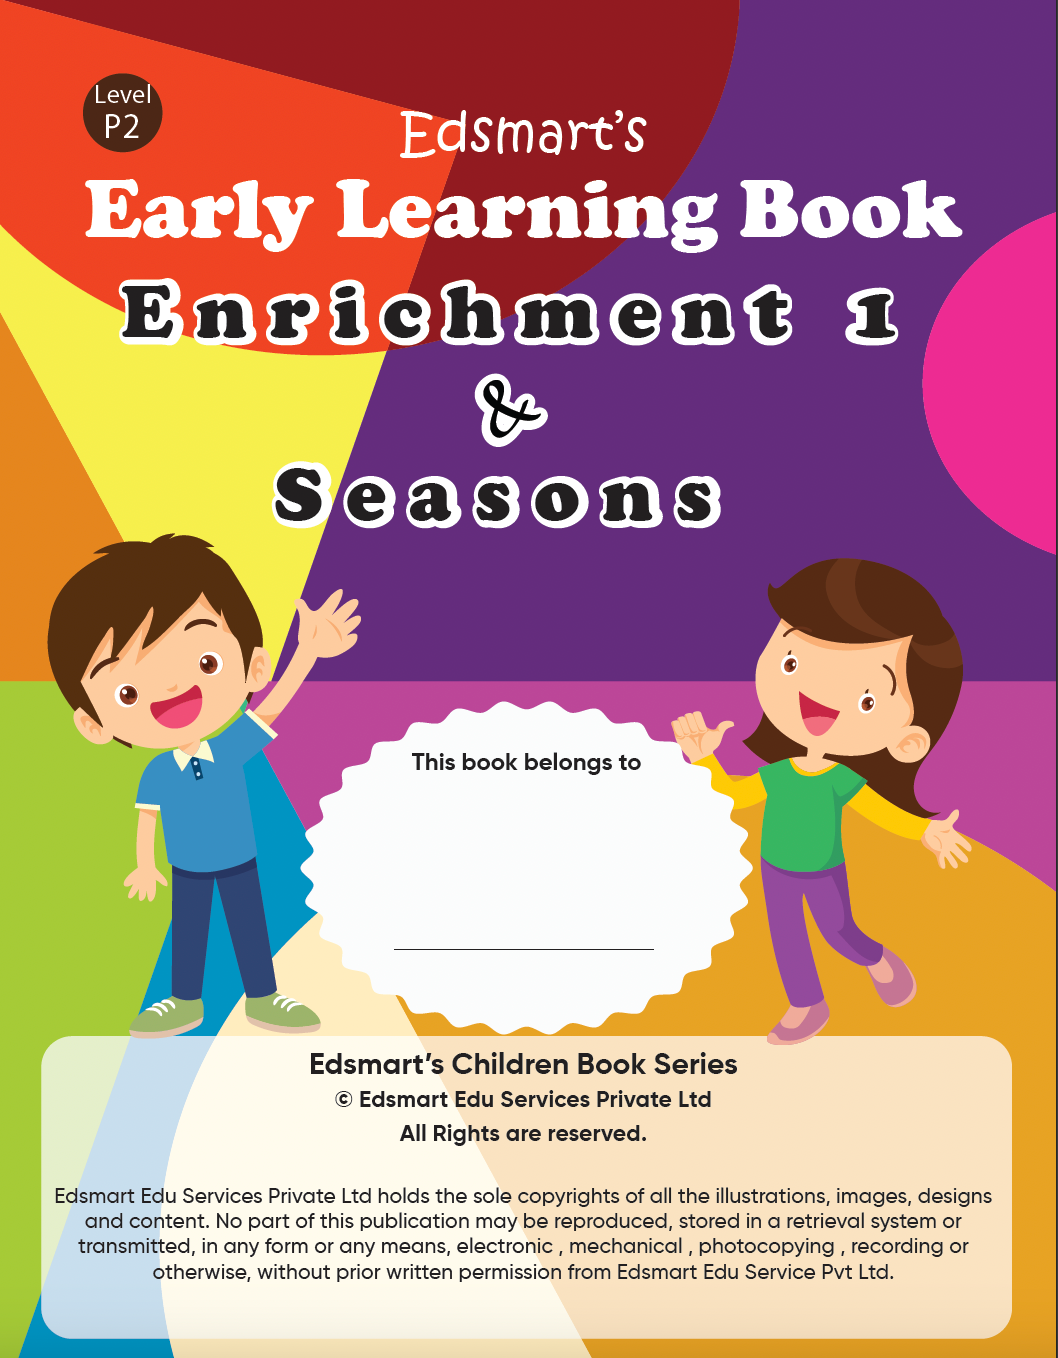 edsmart-nursery-activity-books-for-kids-in-english-3-to-5-years-old